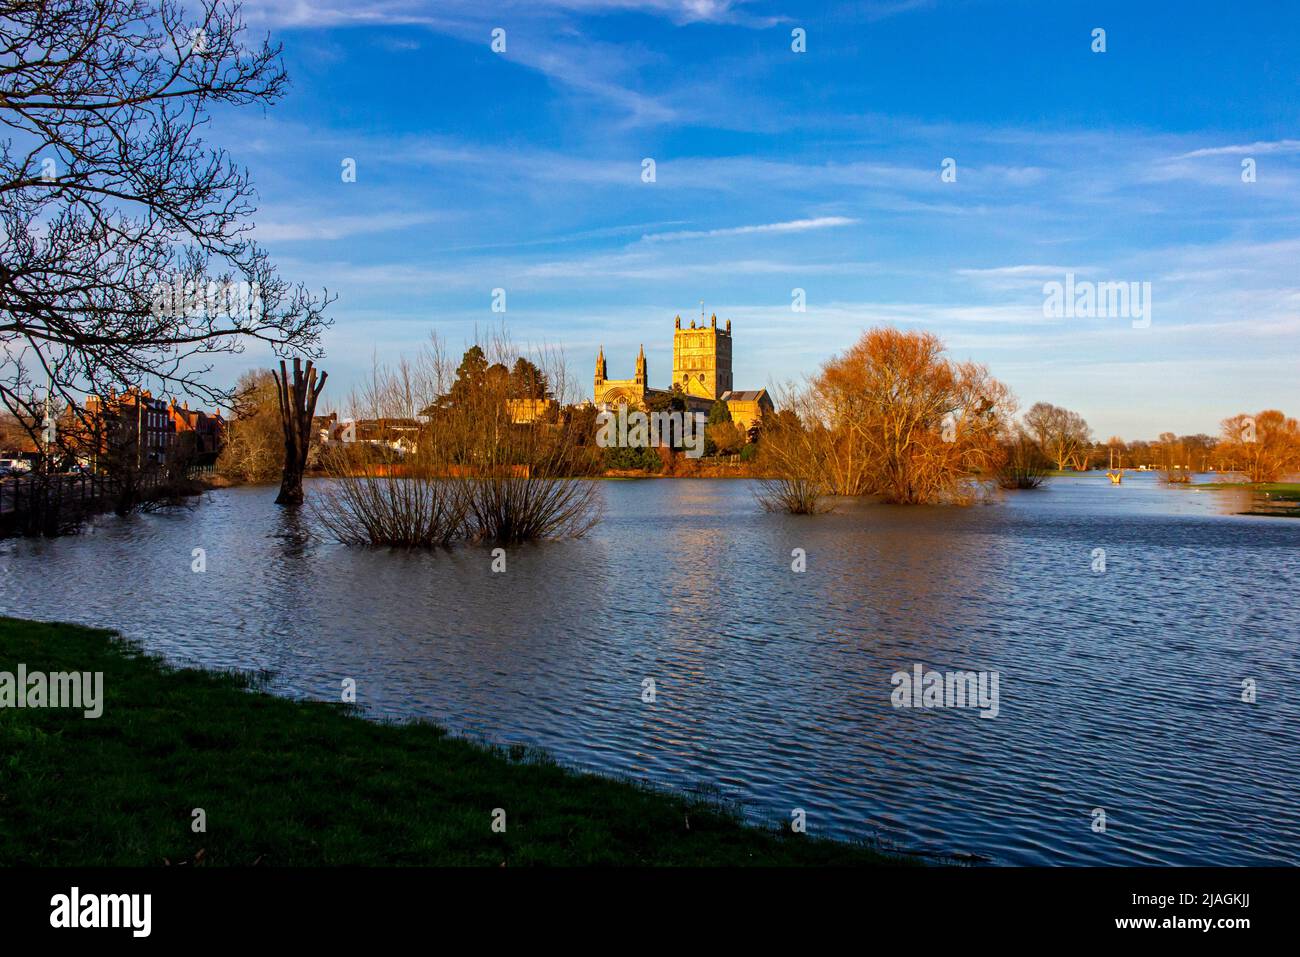 Severe flooding in Tewkesbury Gloucestershire England UK at the point where the Rivers Severn and Avon meet photographed in February 2022. Stock Photo